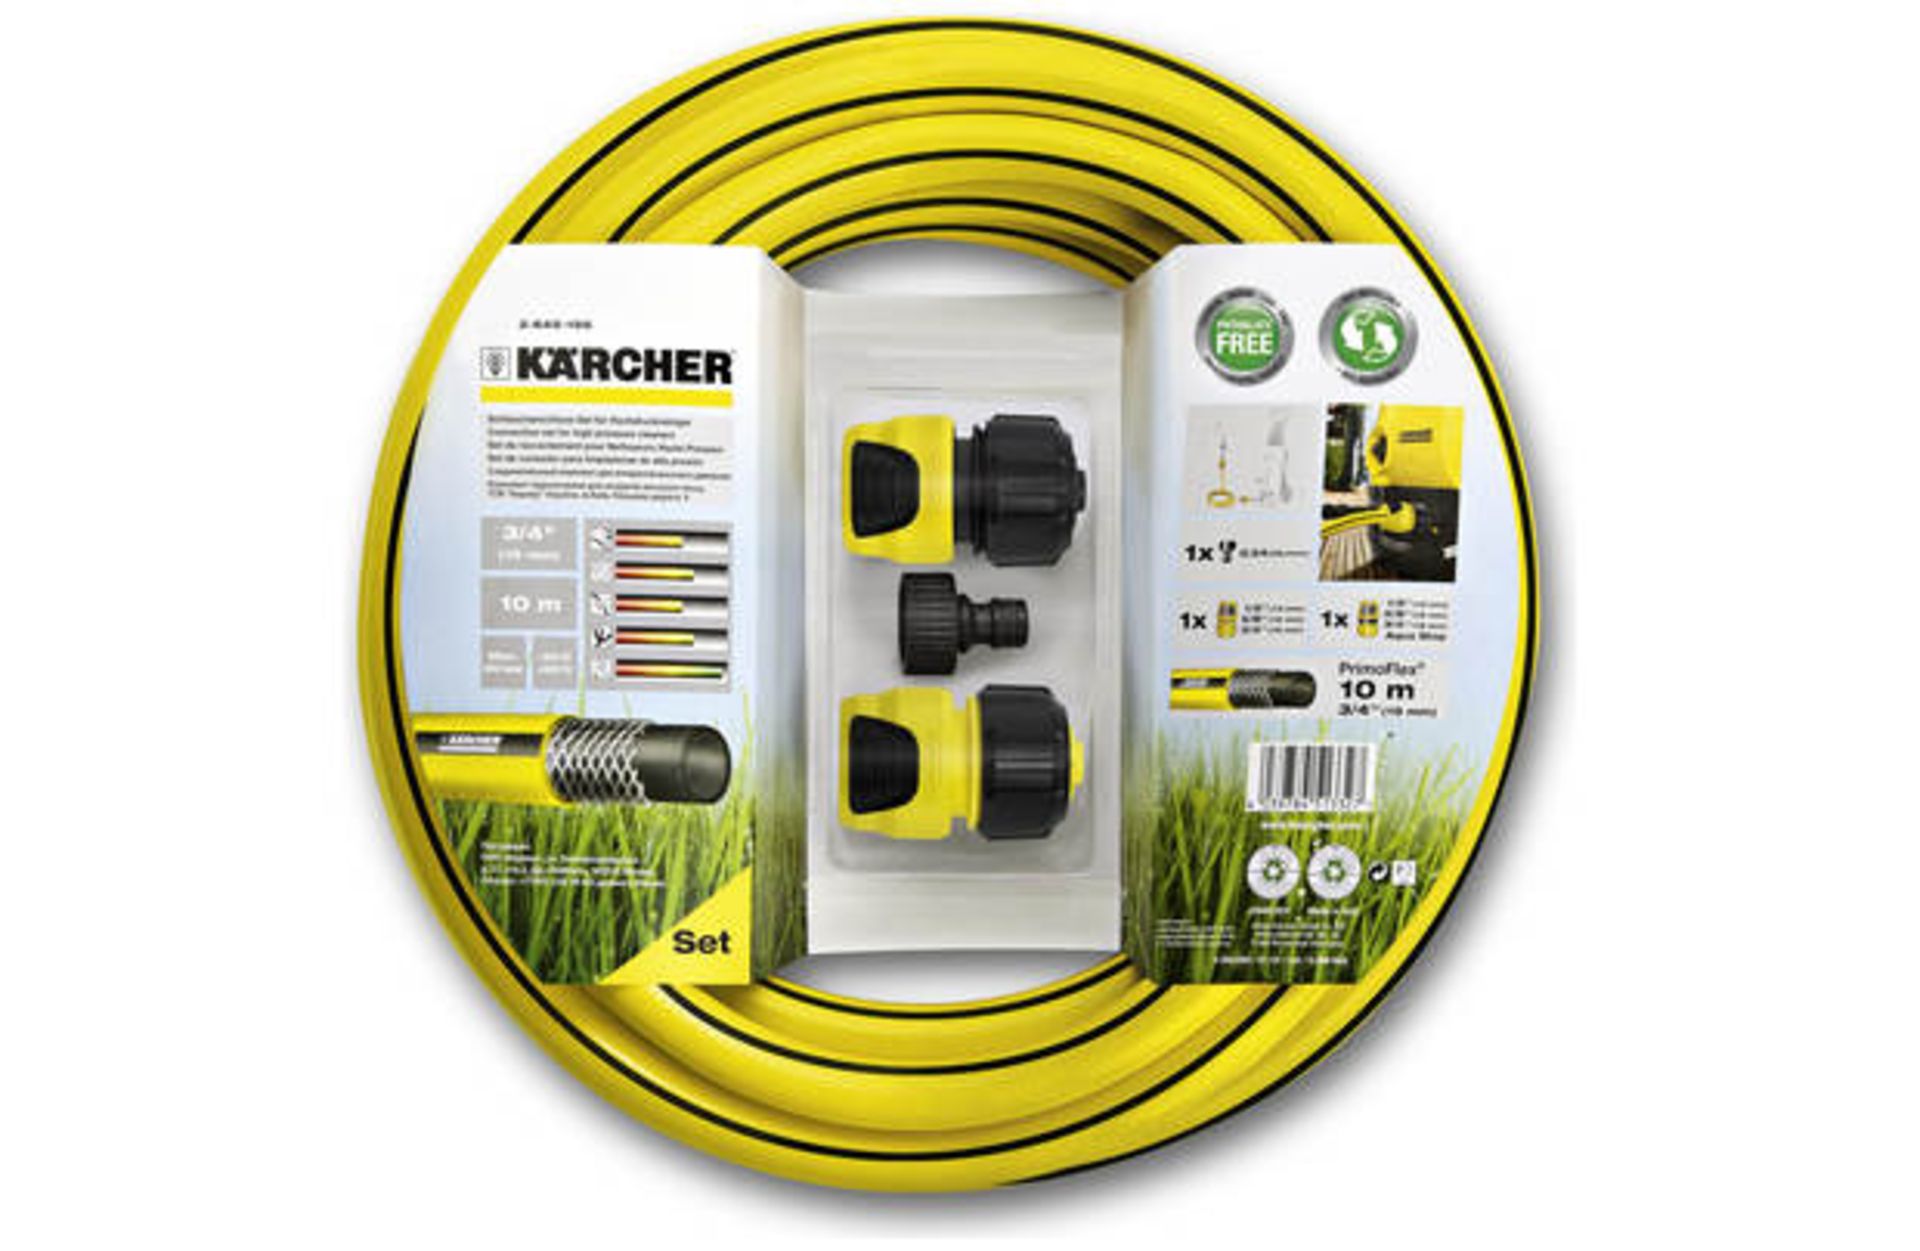 V Brand New Karcher 10m Hose Kit With Three Attachments